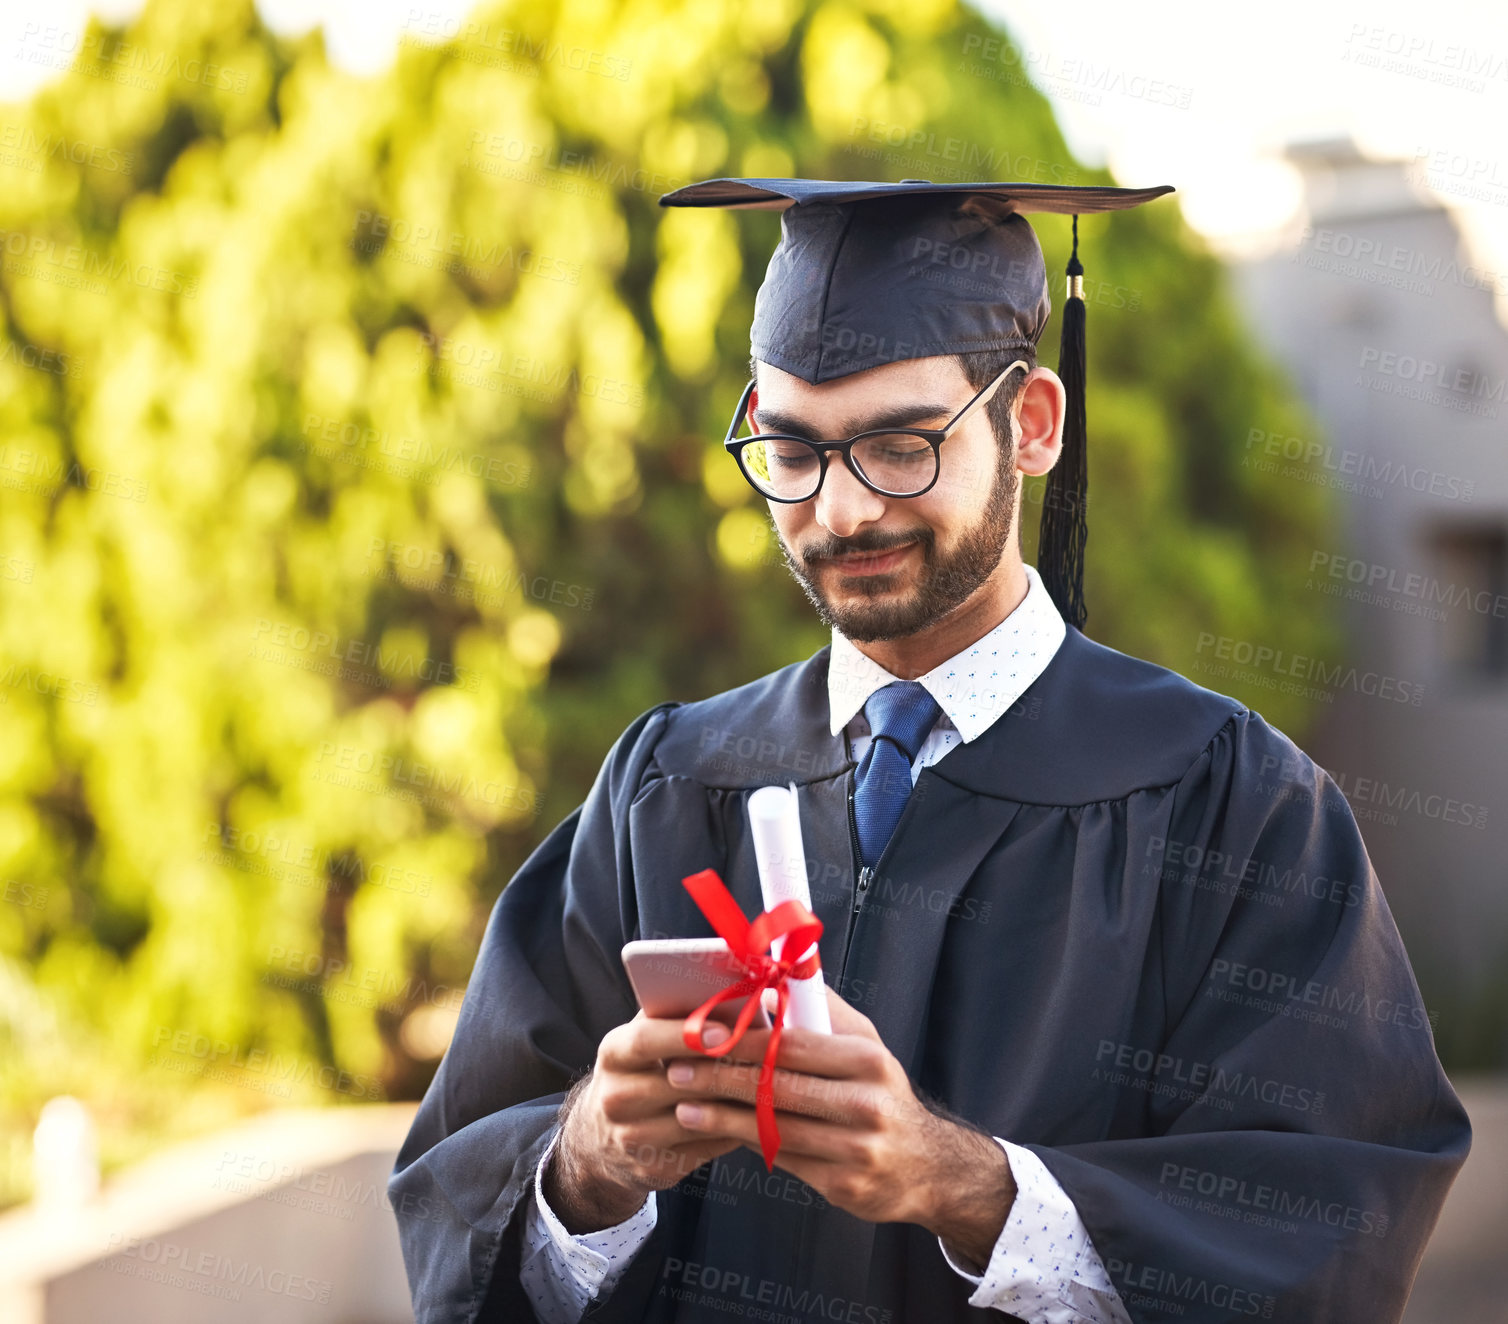 Buy stock photo Shot of a young man using a mobile phone on graduation day